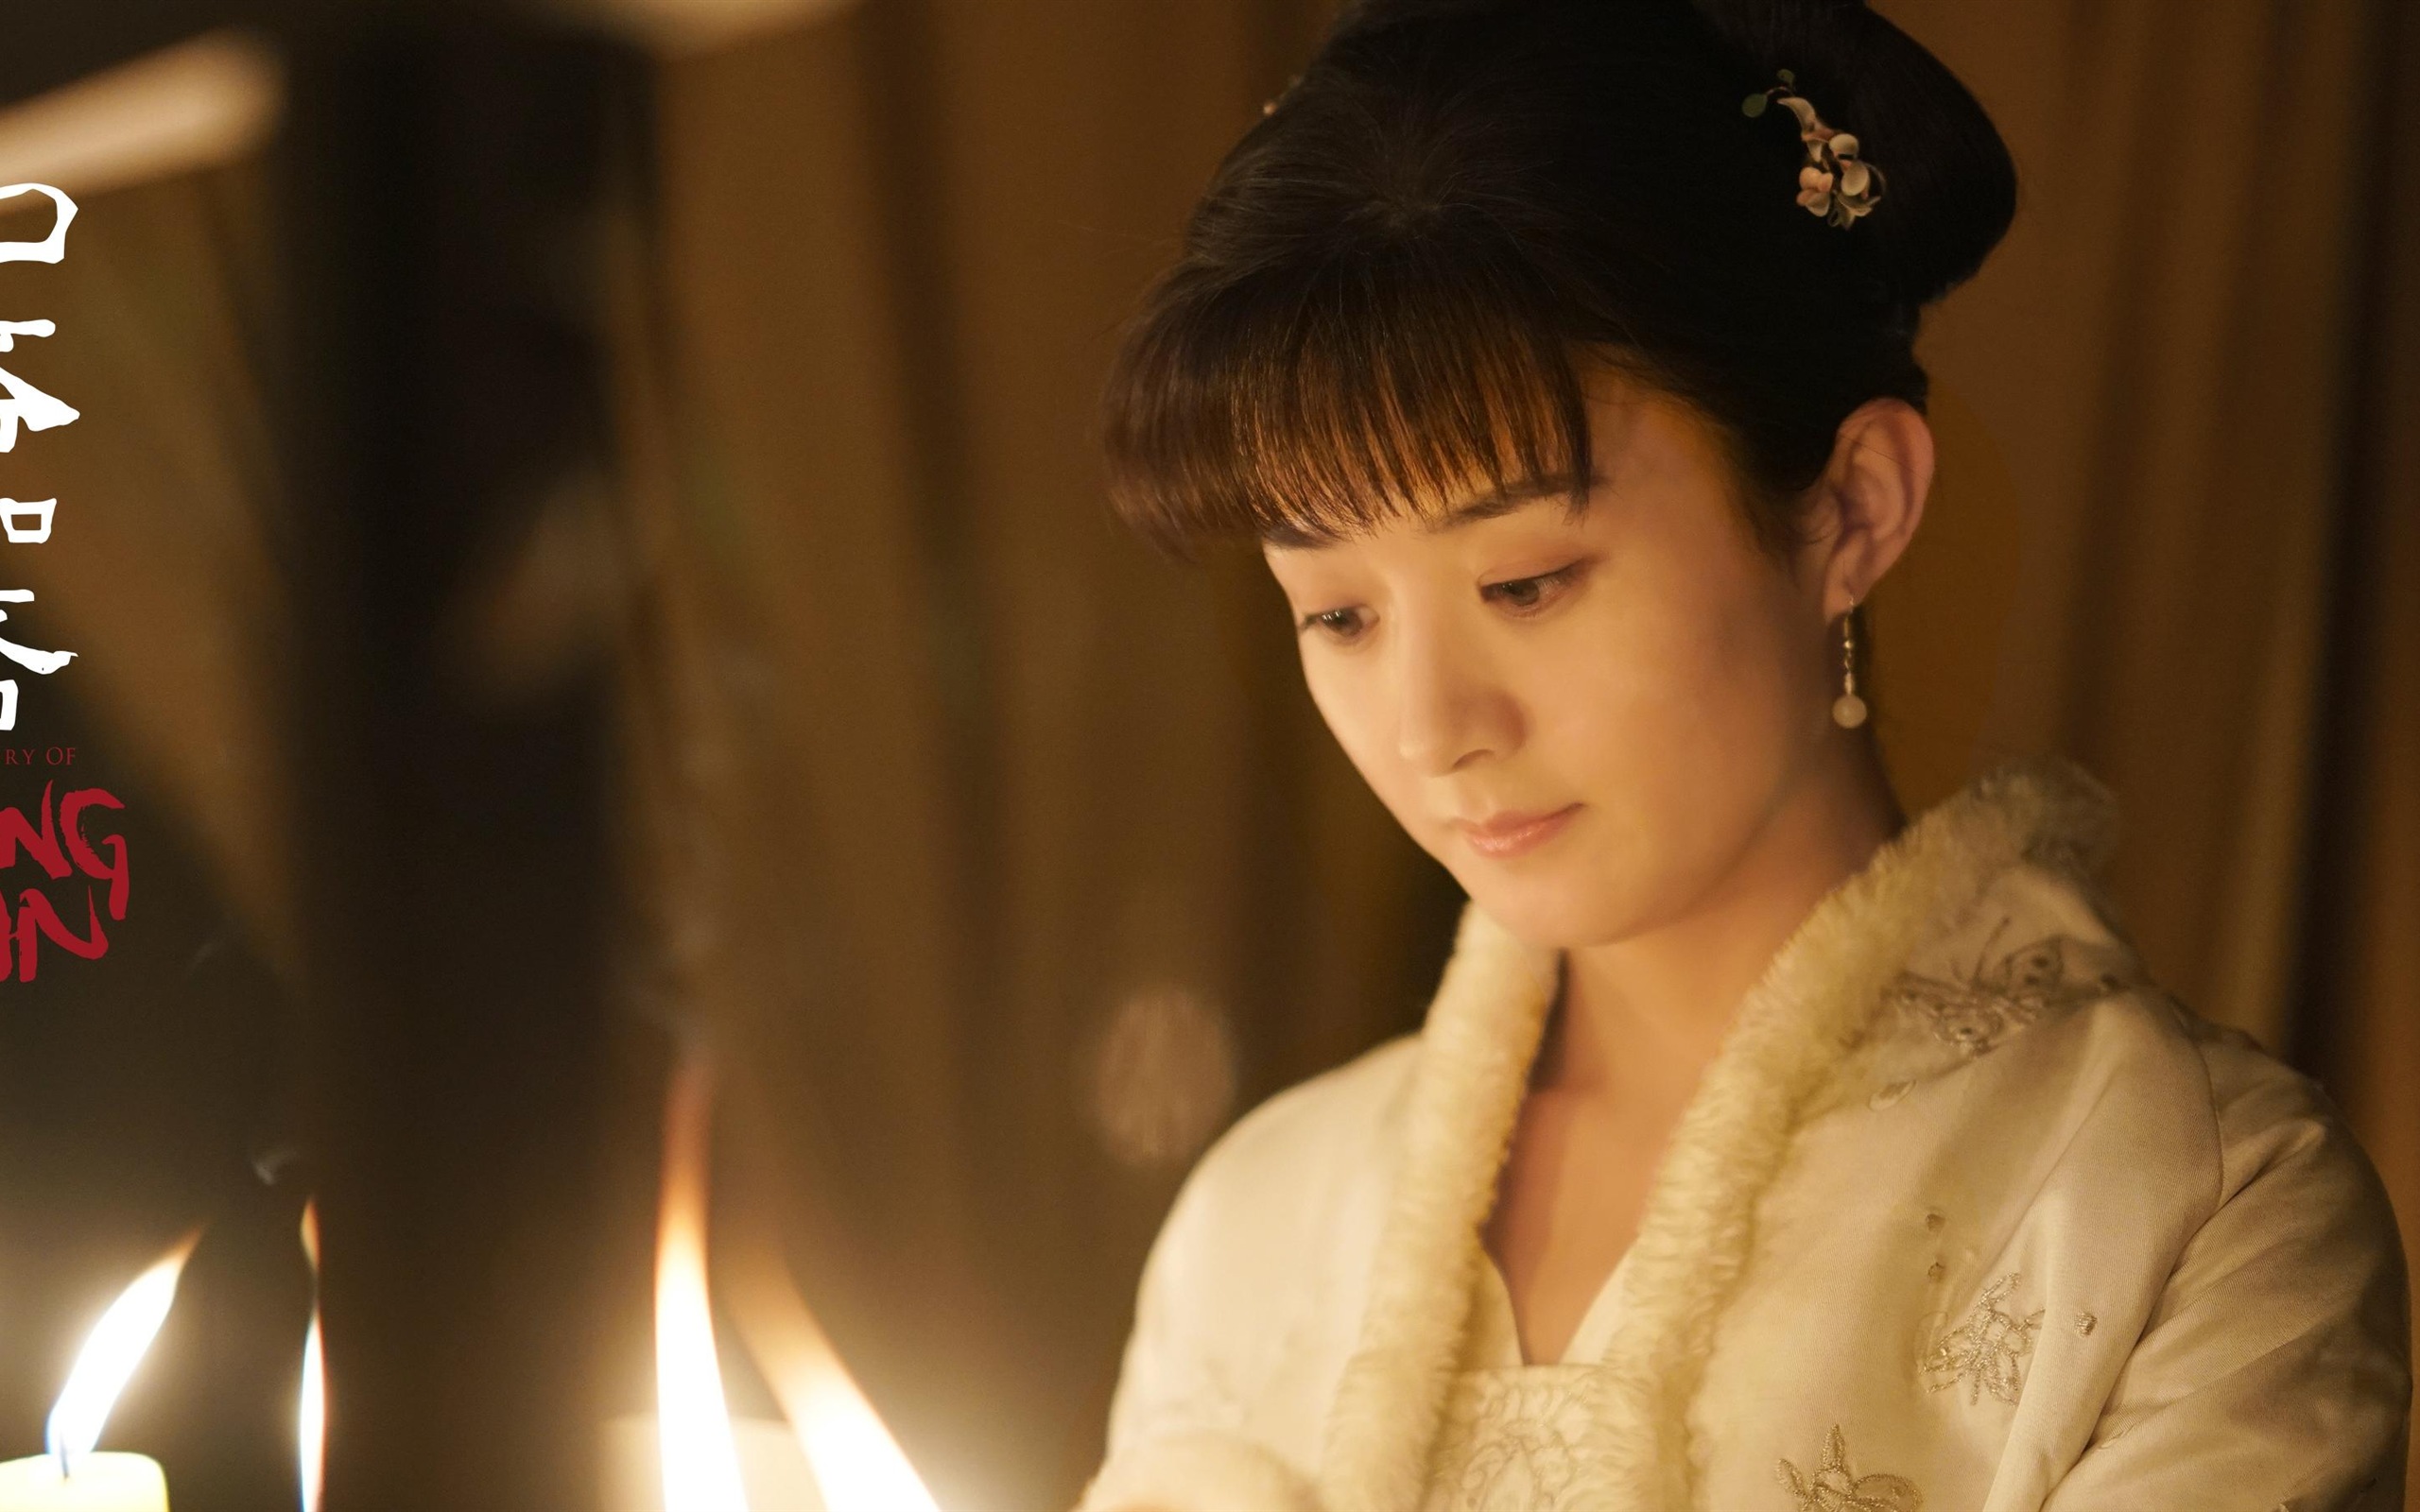 The Story Of MingLan, TV series HD wallpapers #41 - 2560x1600